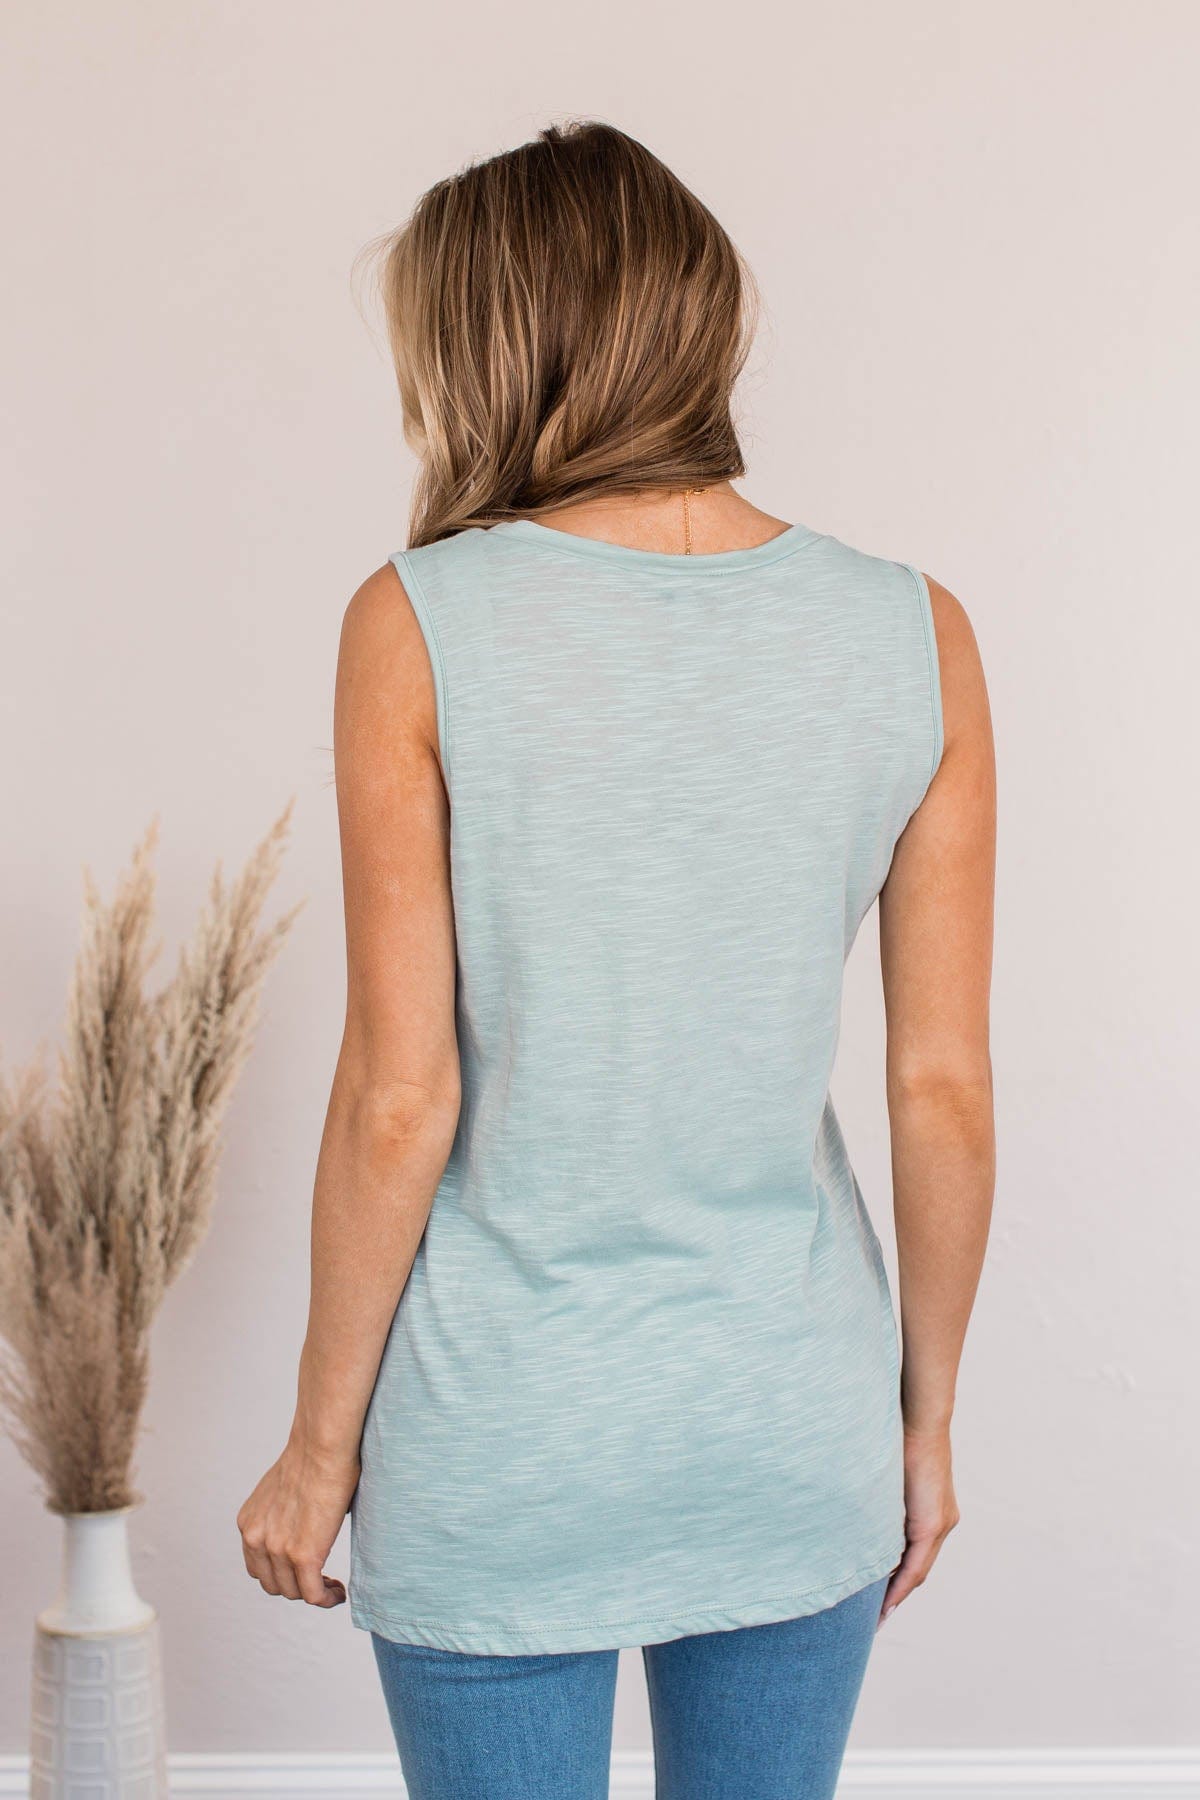 When You Look At Me Pocket Tank- Teal